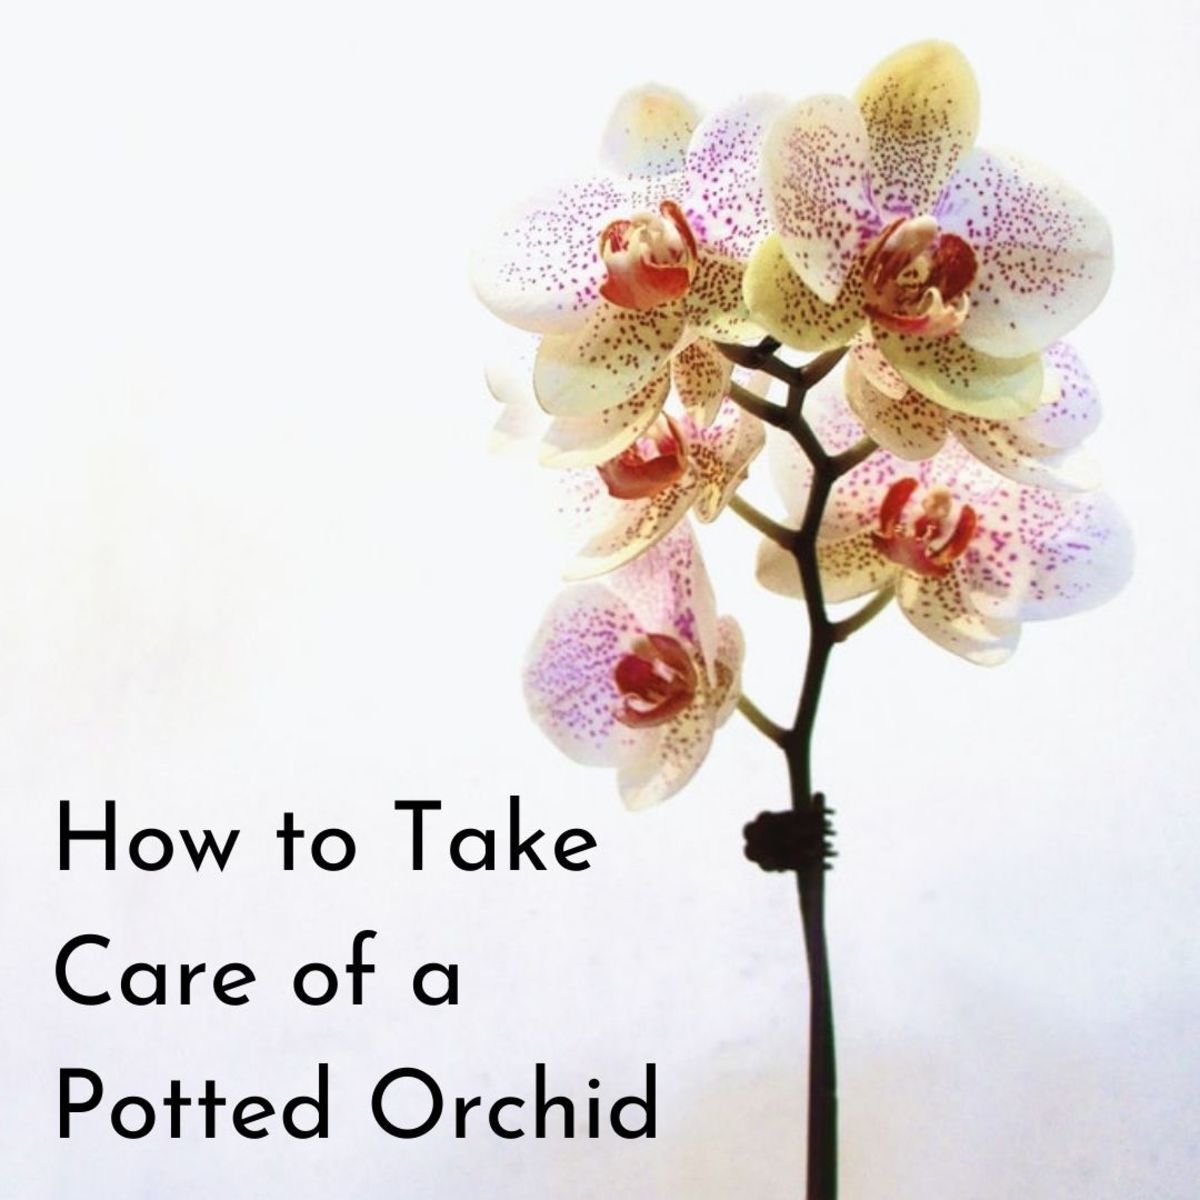 How to Take Care of Potted Orchids